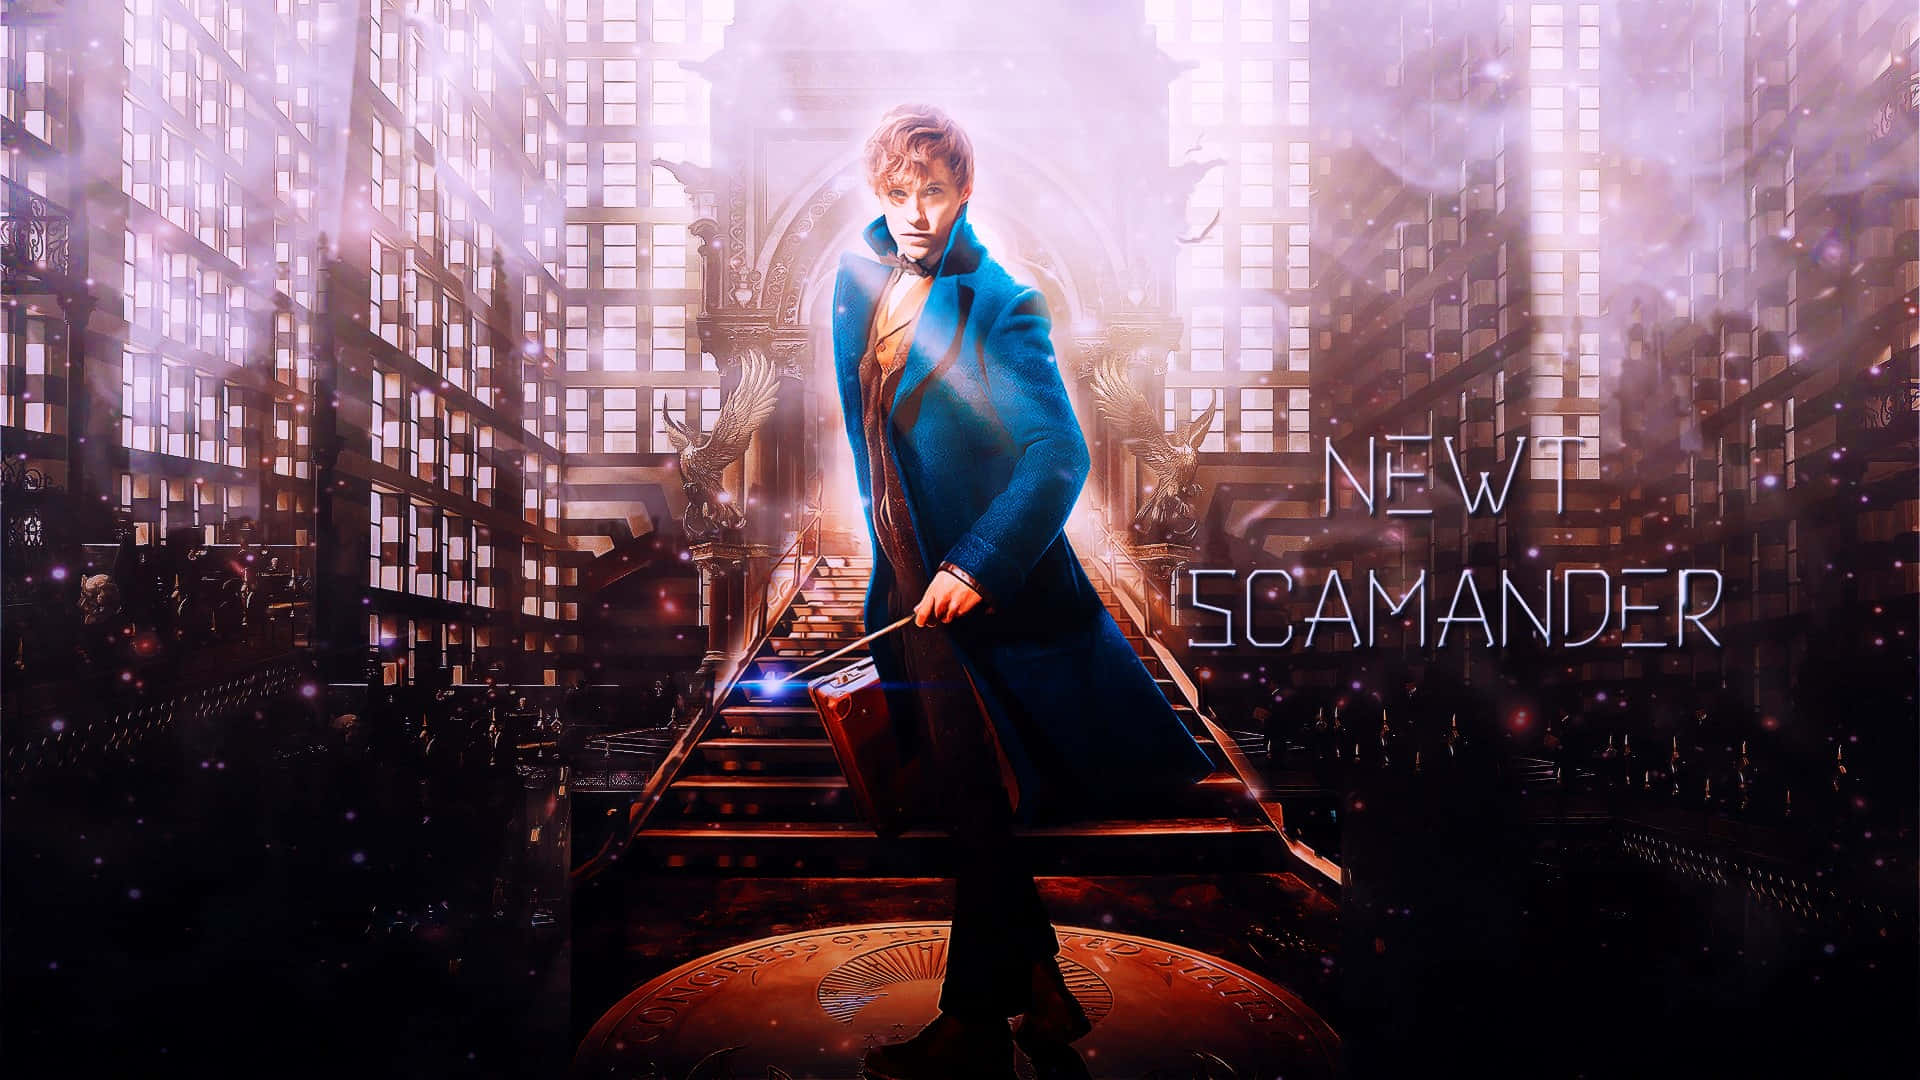 Newt Scamander and magical creatures in Fantastic Beasts movie Wallpaper